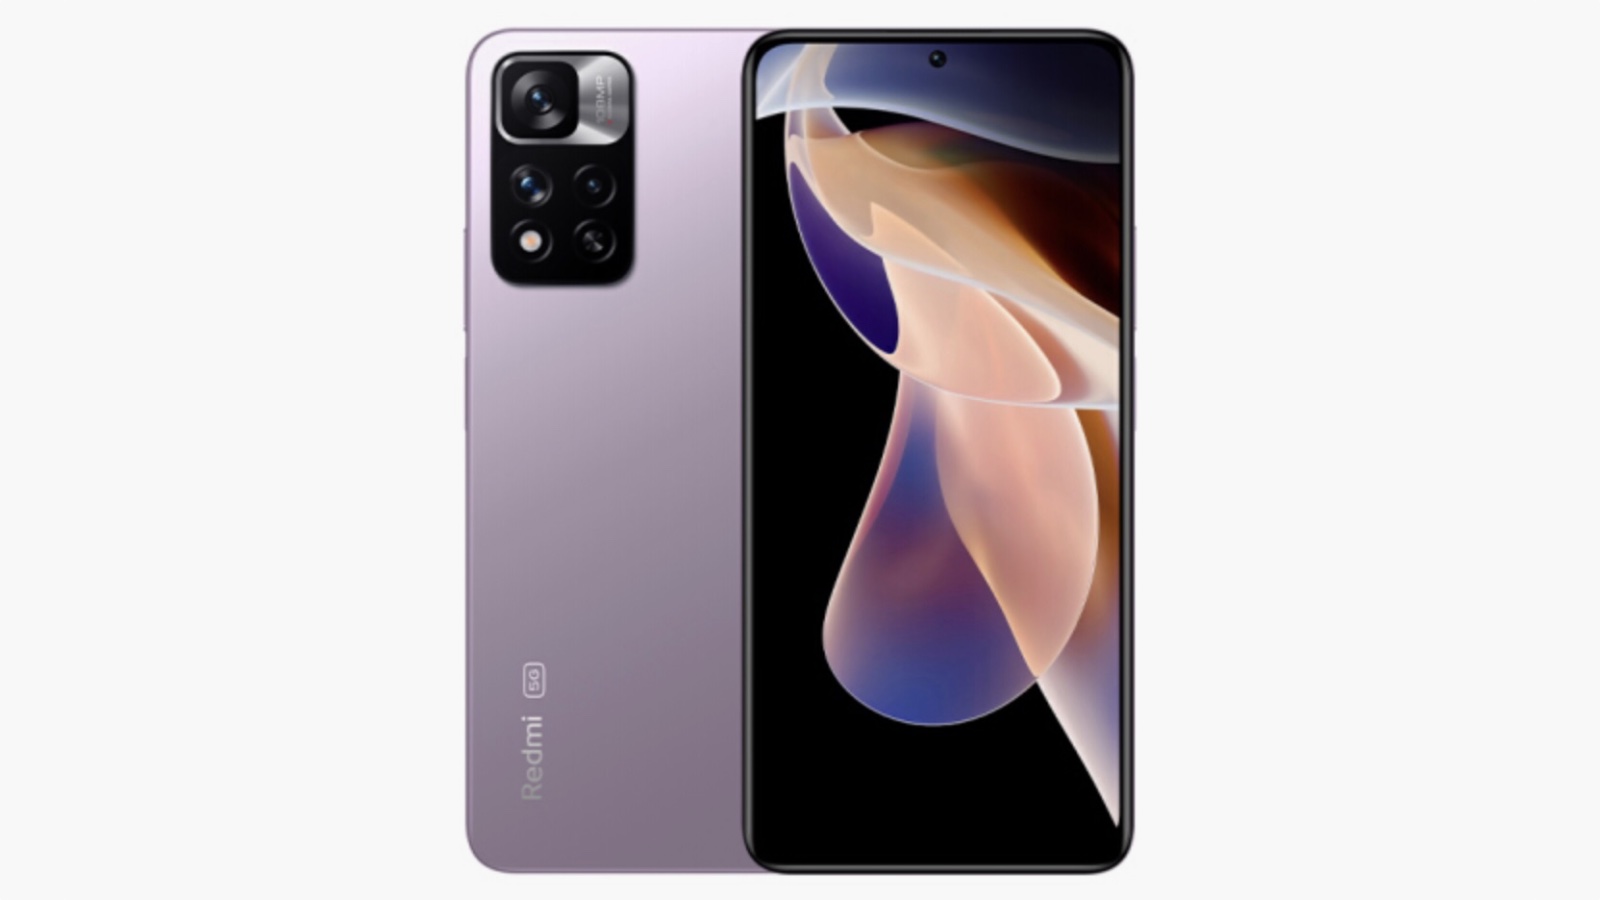 Note 11 pro global. Redmi Note 11 Pro. Смартфон Xiaomi Redmi 11 Pro. Смартфон Xiaomi Redmi Note 11 Pro Plus. Xiaomi Redmi Note 11 Pro 5g.